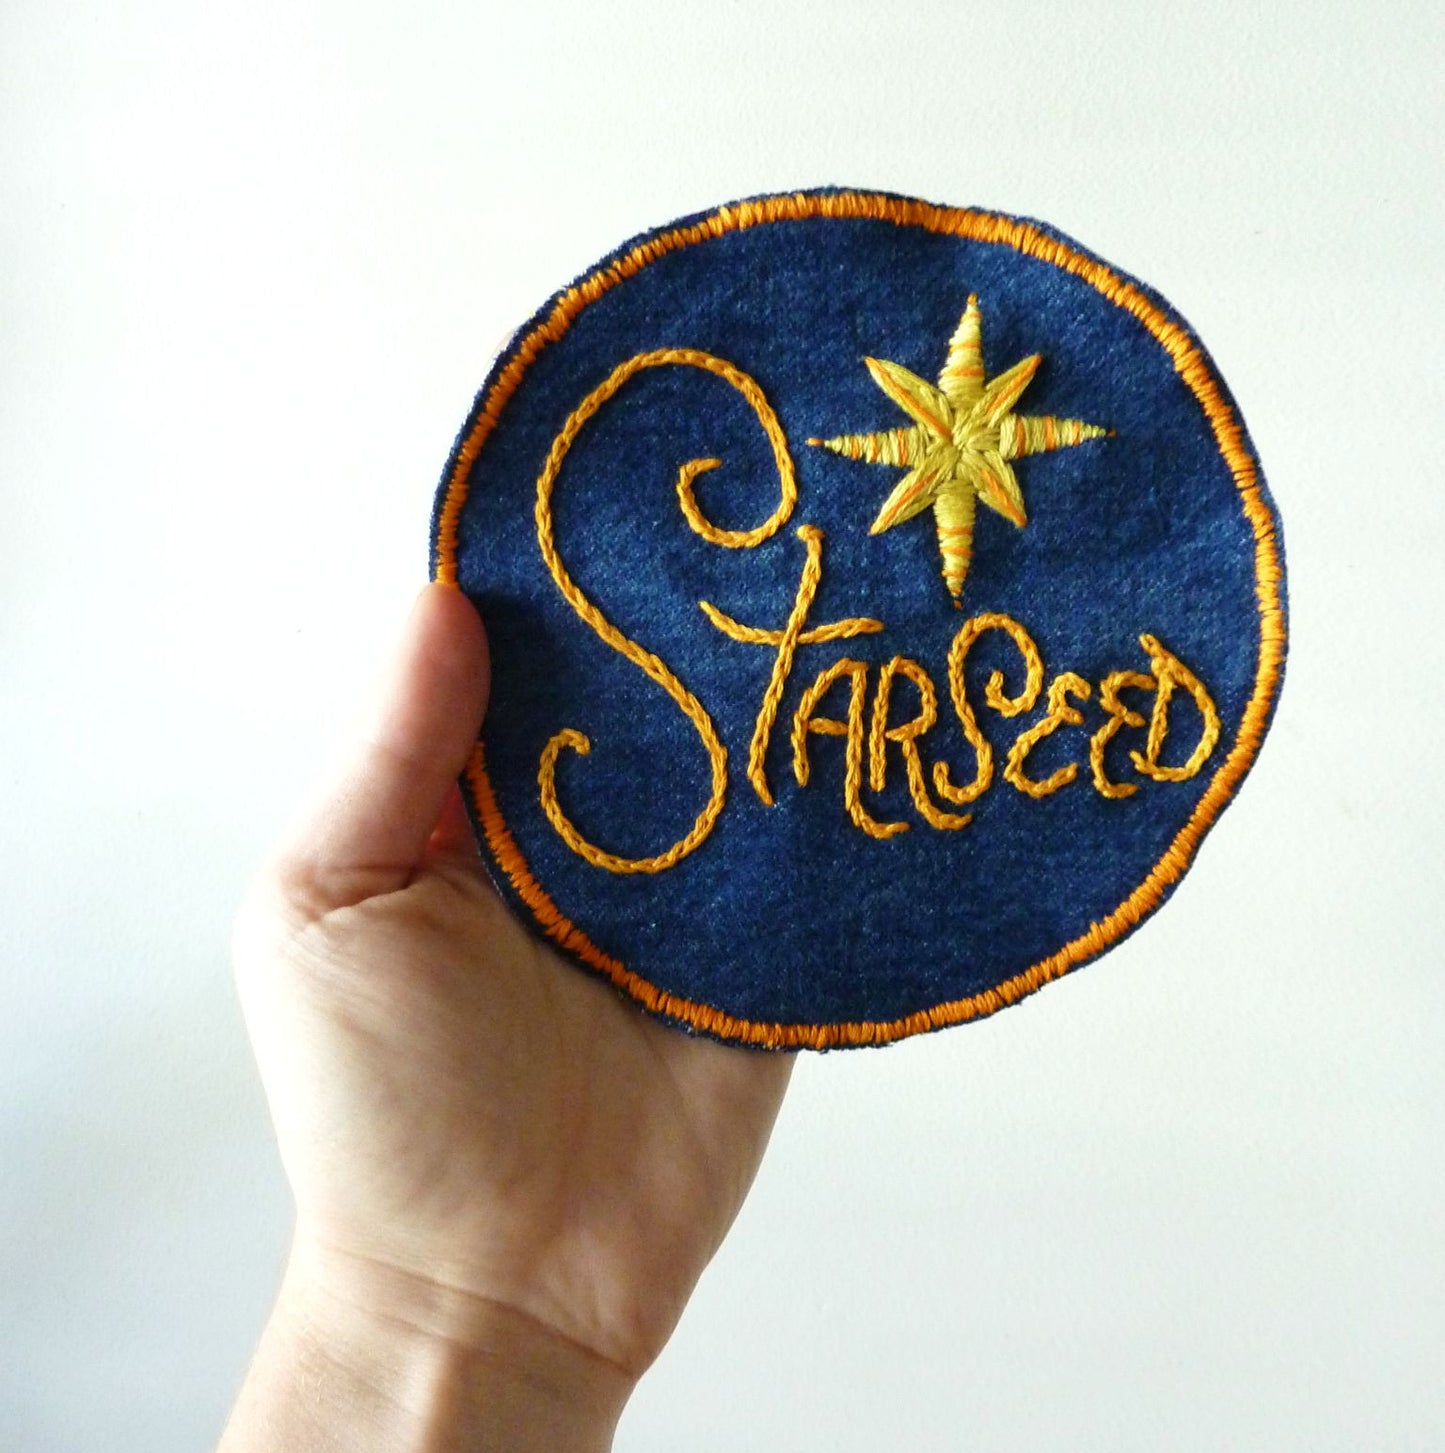 Starseed Embroidered Patch on Vintage Denim